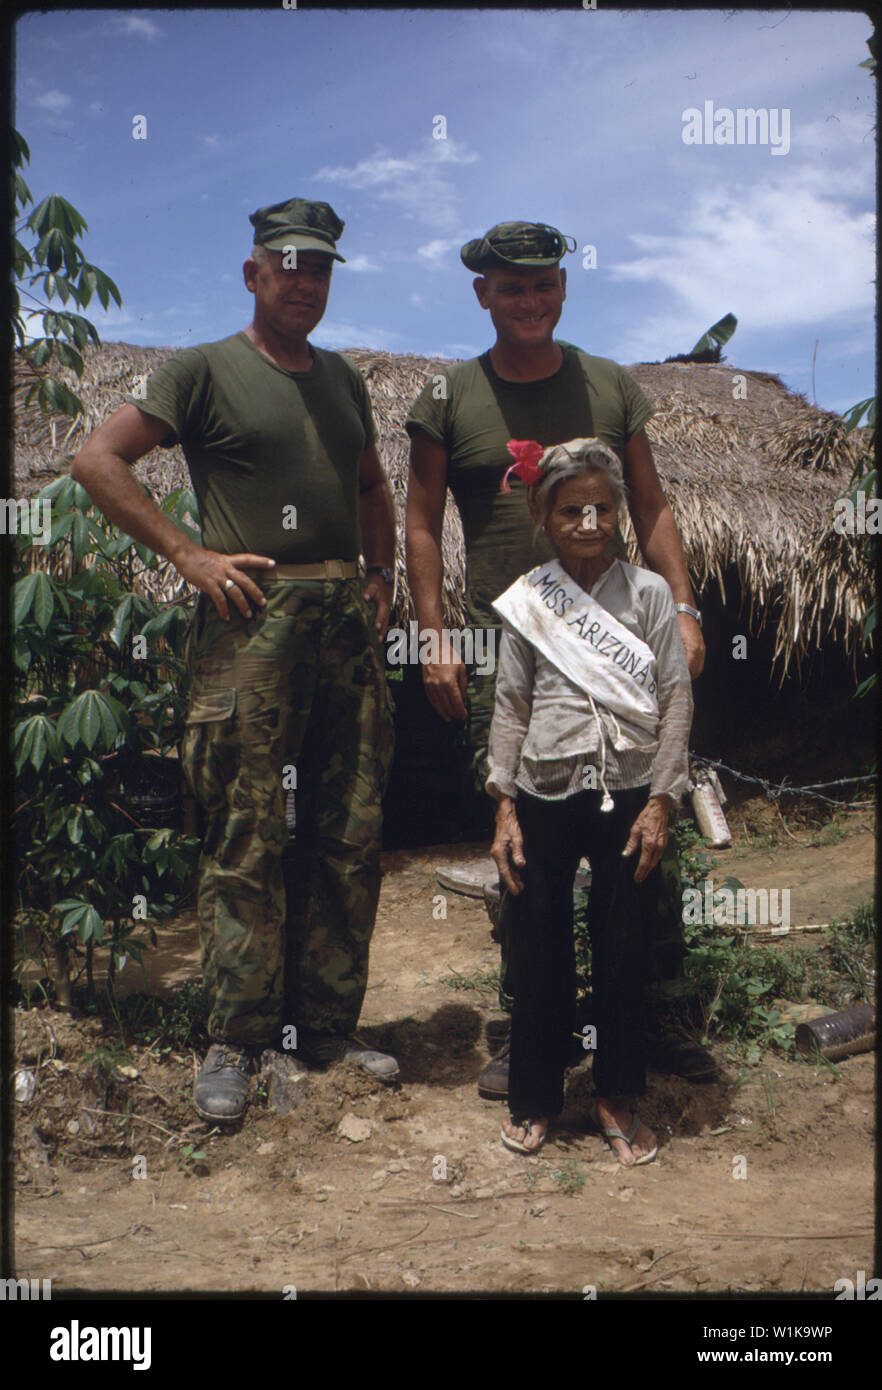 Vietnam....Sergeant Major Lewis E. Tuttle and Major O'Toole pose with an old woman in the Arizona Territory. The photo was originally shot as a joke, since the 1st Battalion, 5th Marine Regiment, was operating in the area known as the Arizona Territory at the same time the Miss Universe contest was being held in Tokyo. Stock Photo